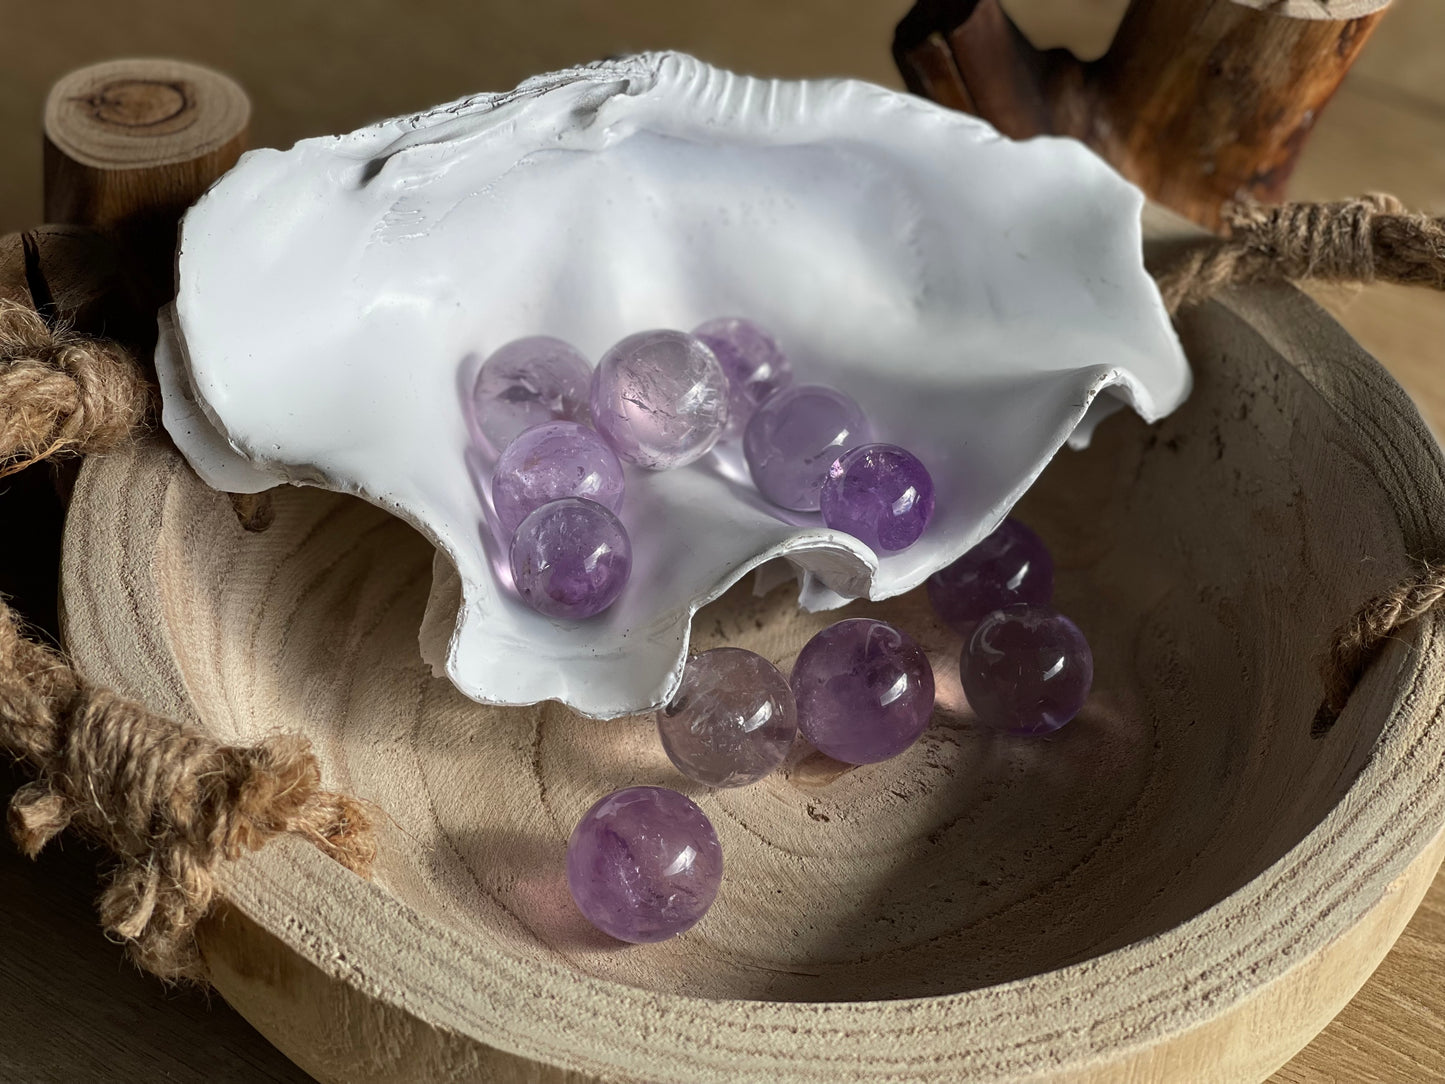 Amethyst with rainbow small spheres